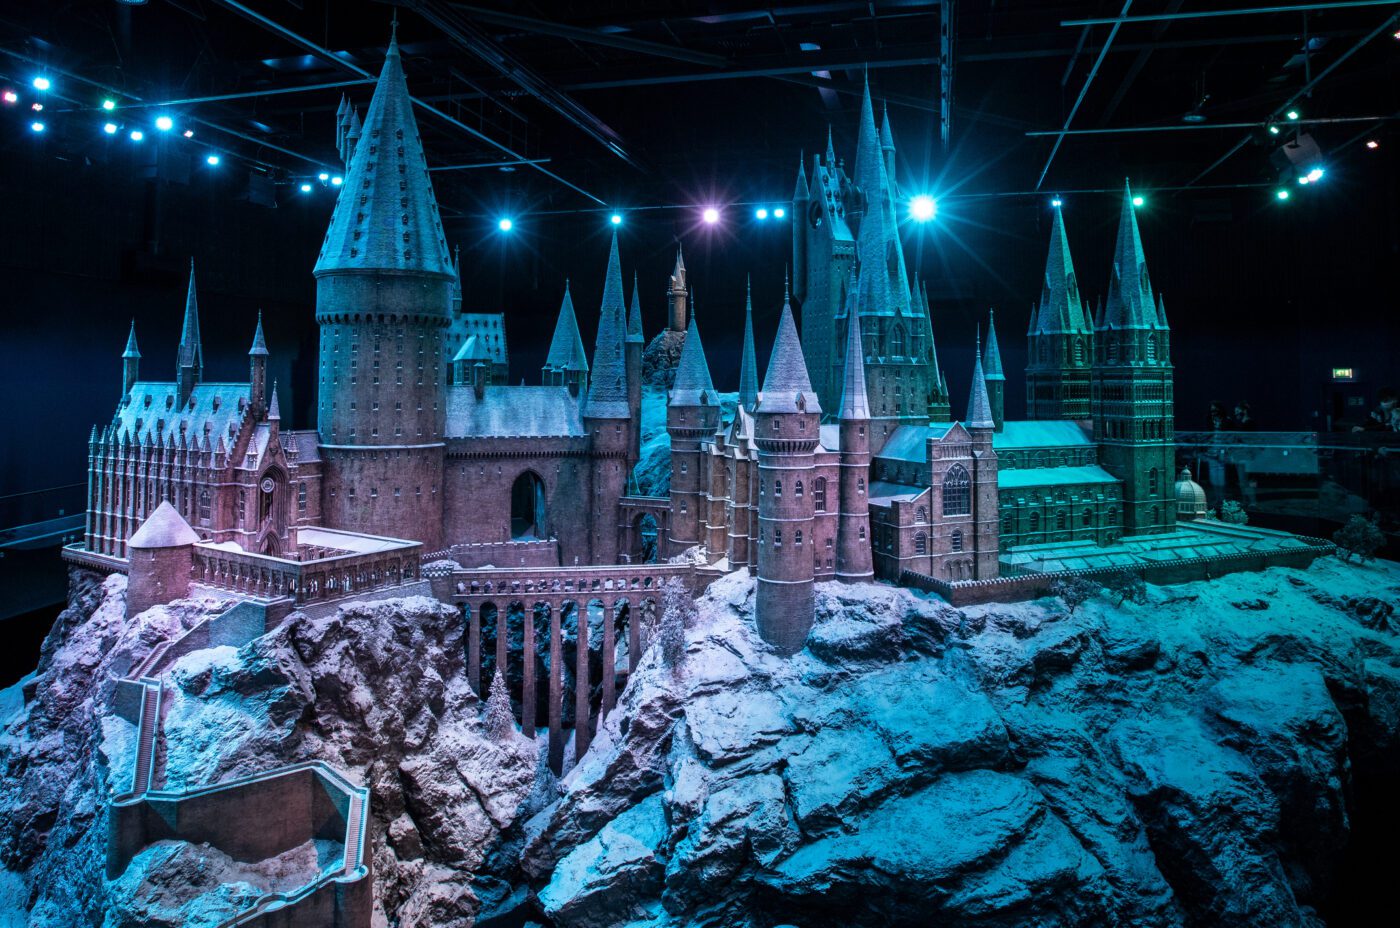 Hogwarts Castle in the Snow at the Making of Harry Potter Studio Tour